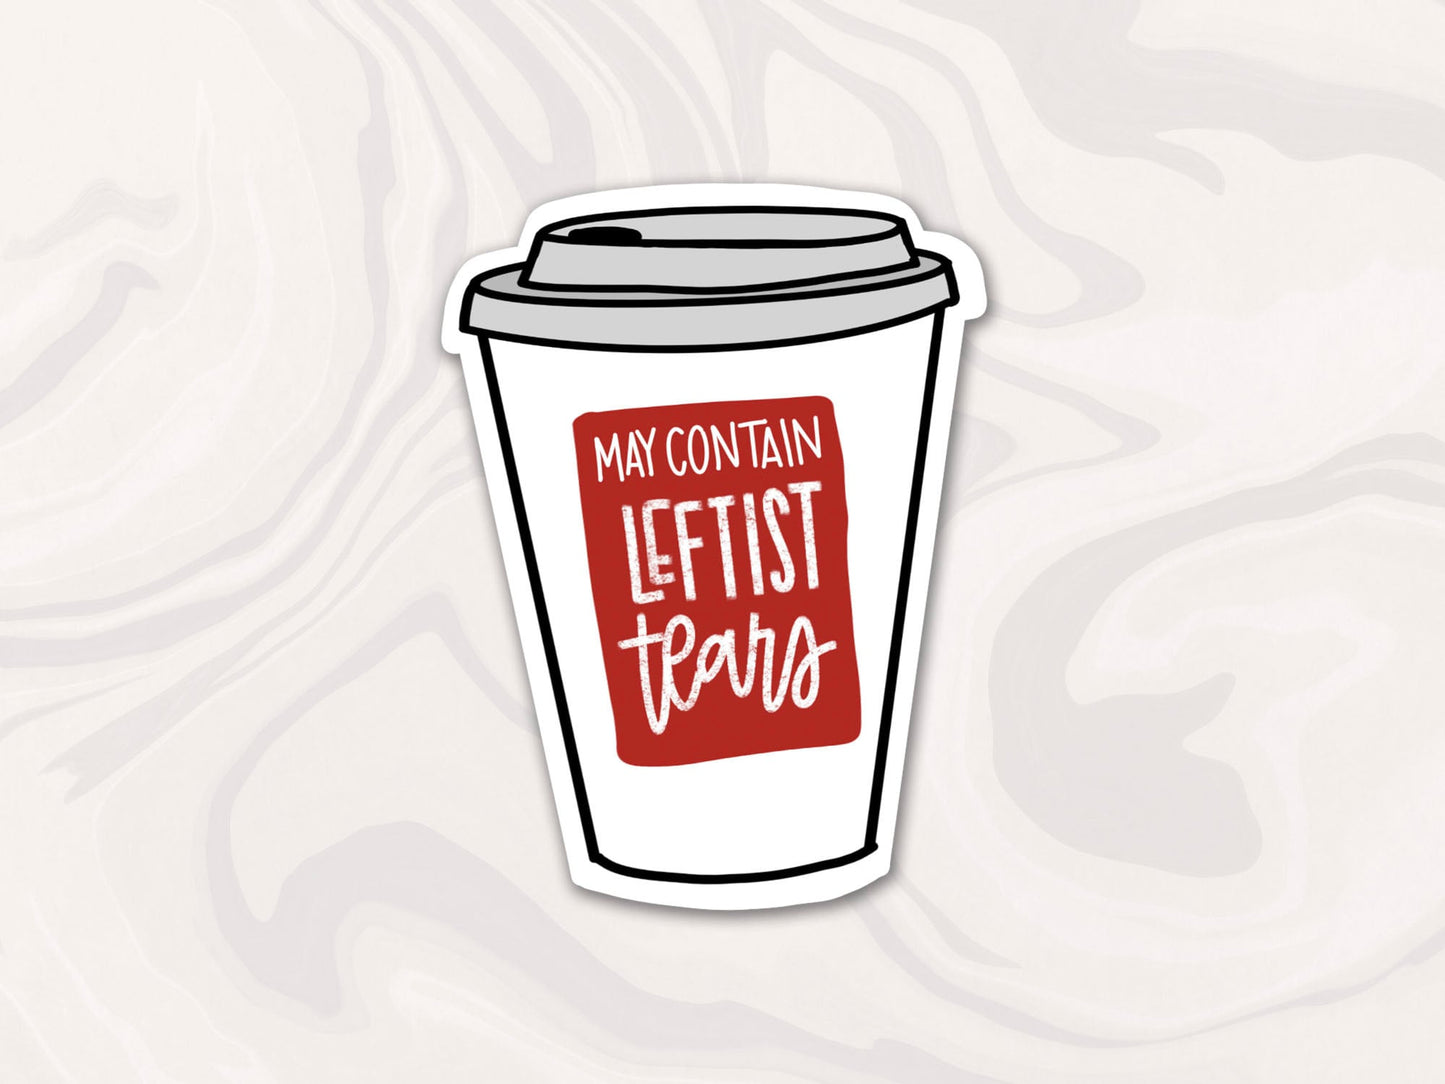 May Contain Leftist Tears Sticker, American Sticker, America Accessories and Gifts, Republican Sticker, Conservative Accessory, Gift